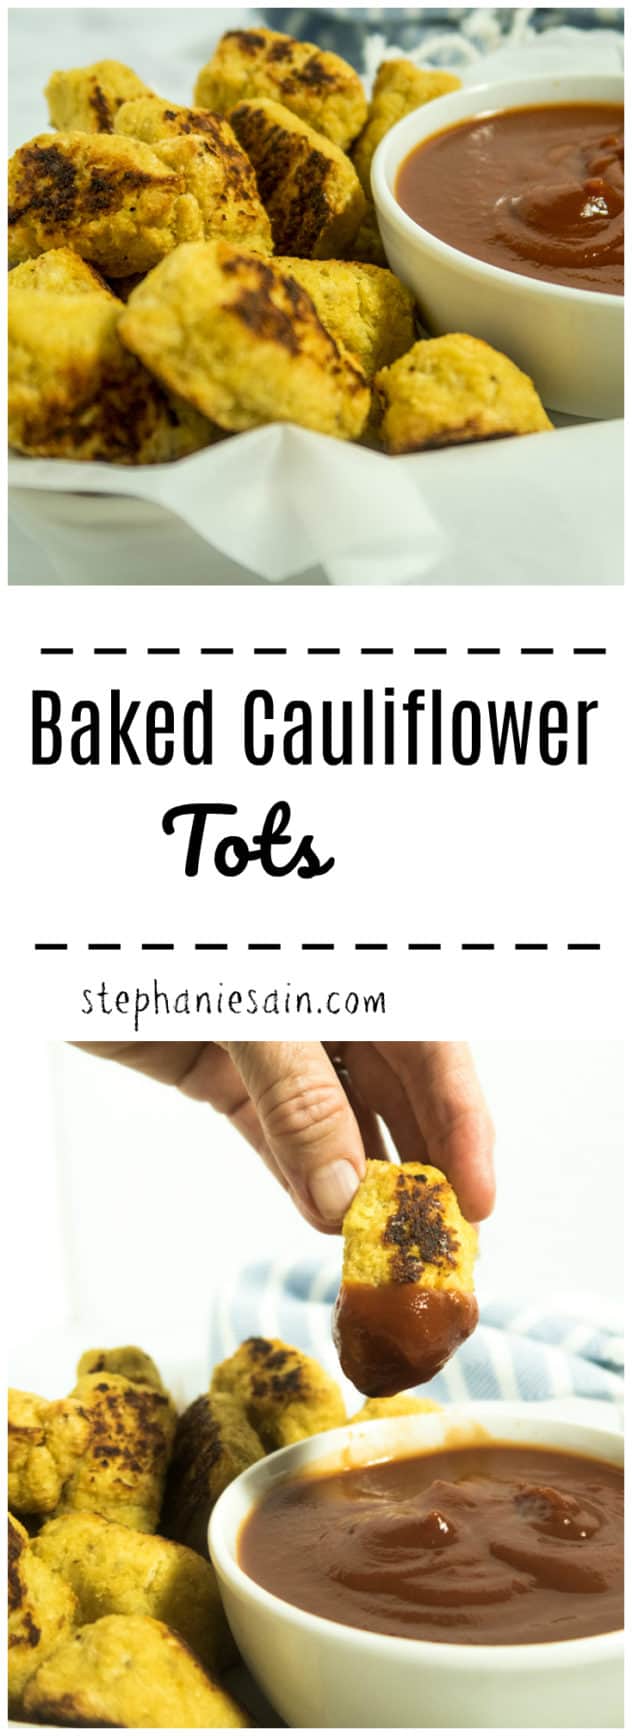 Baked Cauliflower Tots only require six ingredients for a tasty, healthier low carb option to traditional tater tots. Great as a side, or snack. Vegetarian & Gluten Free.